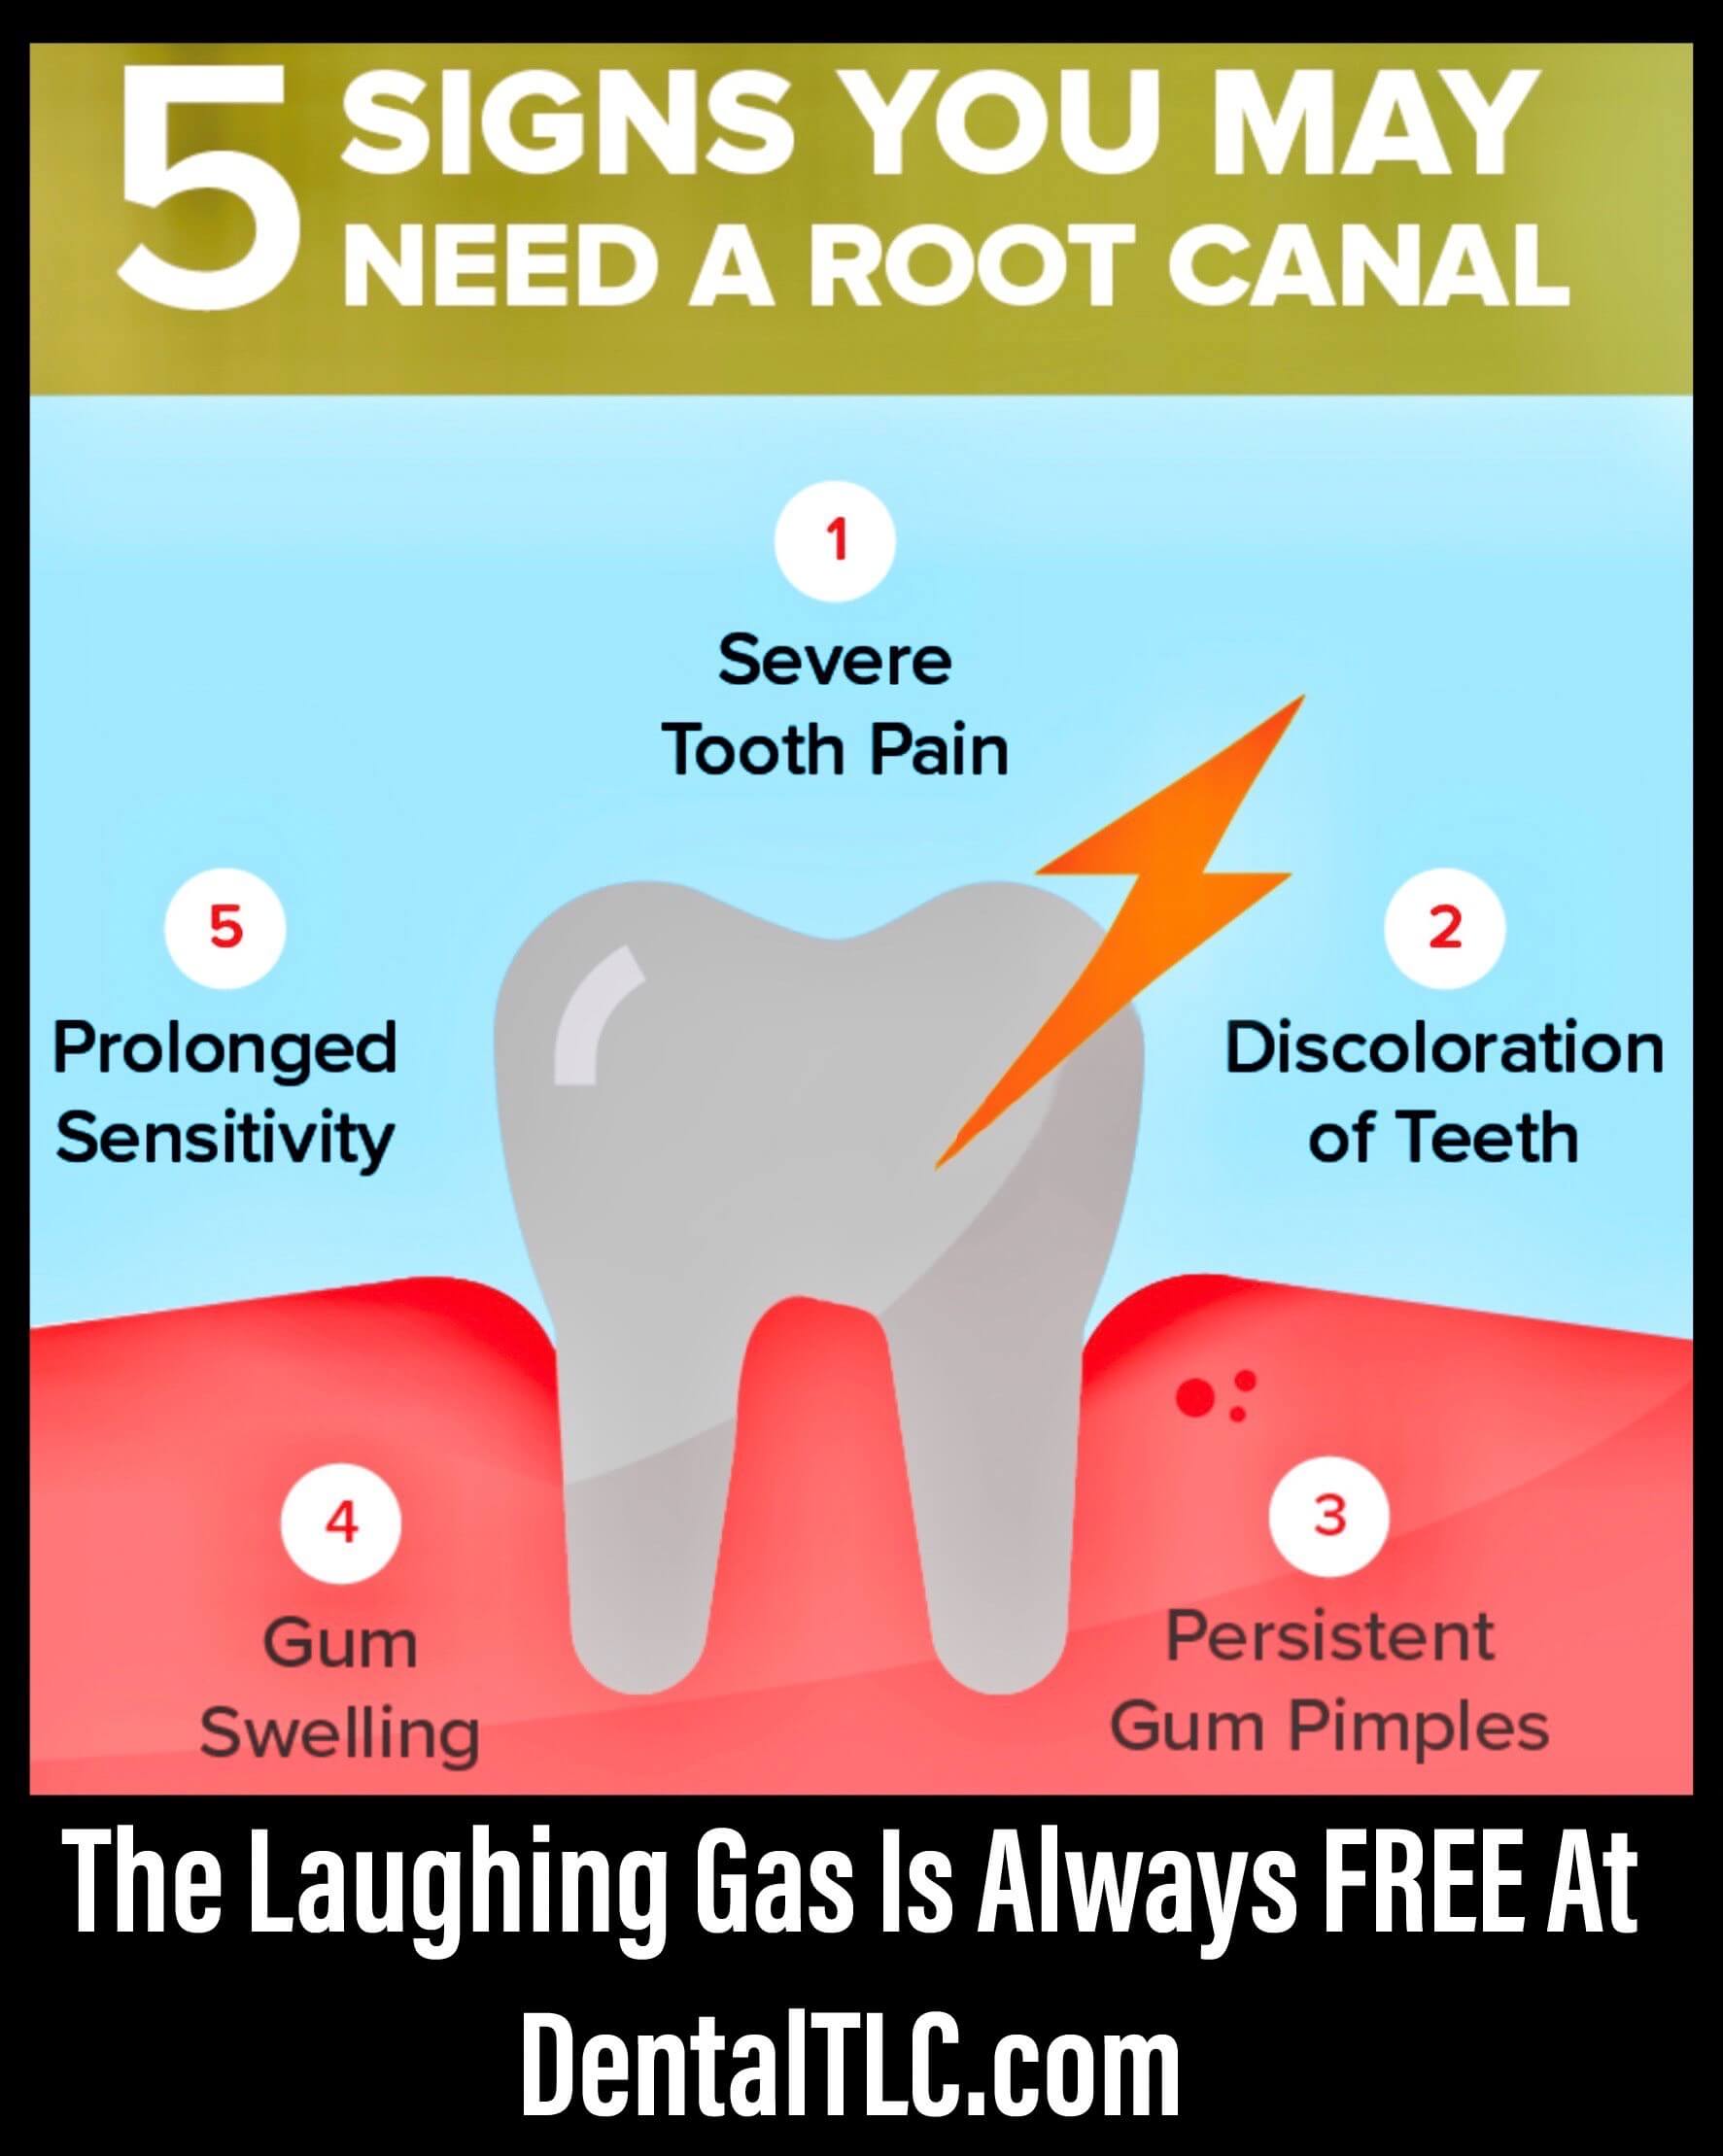 ENDO Marketing- 5 Signs You May Need A Root Canal | Dental TLC